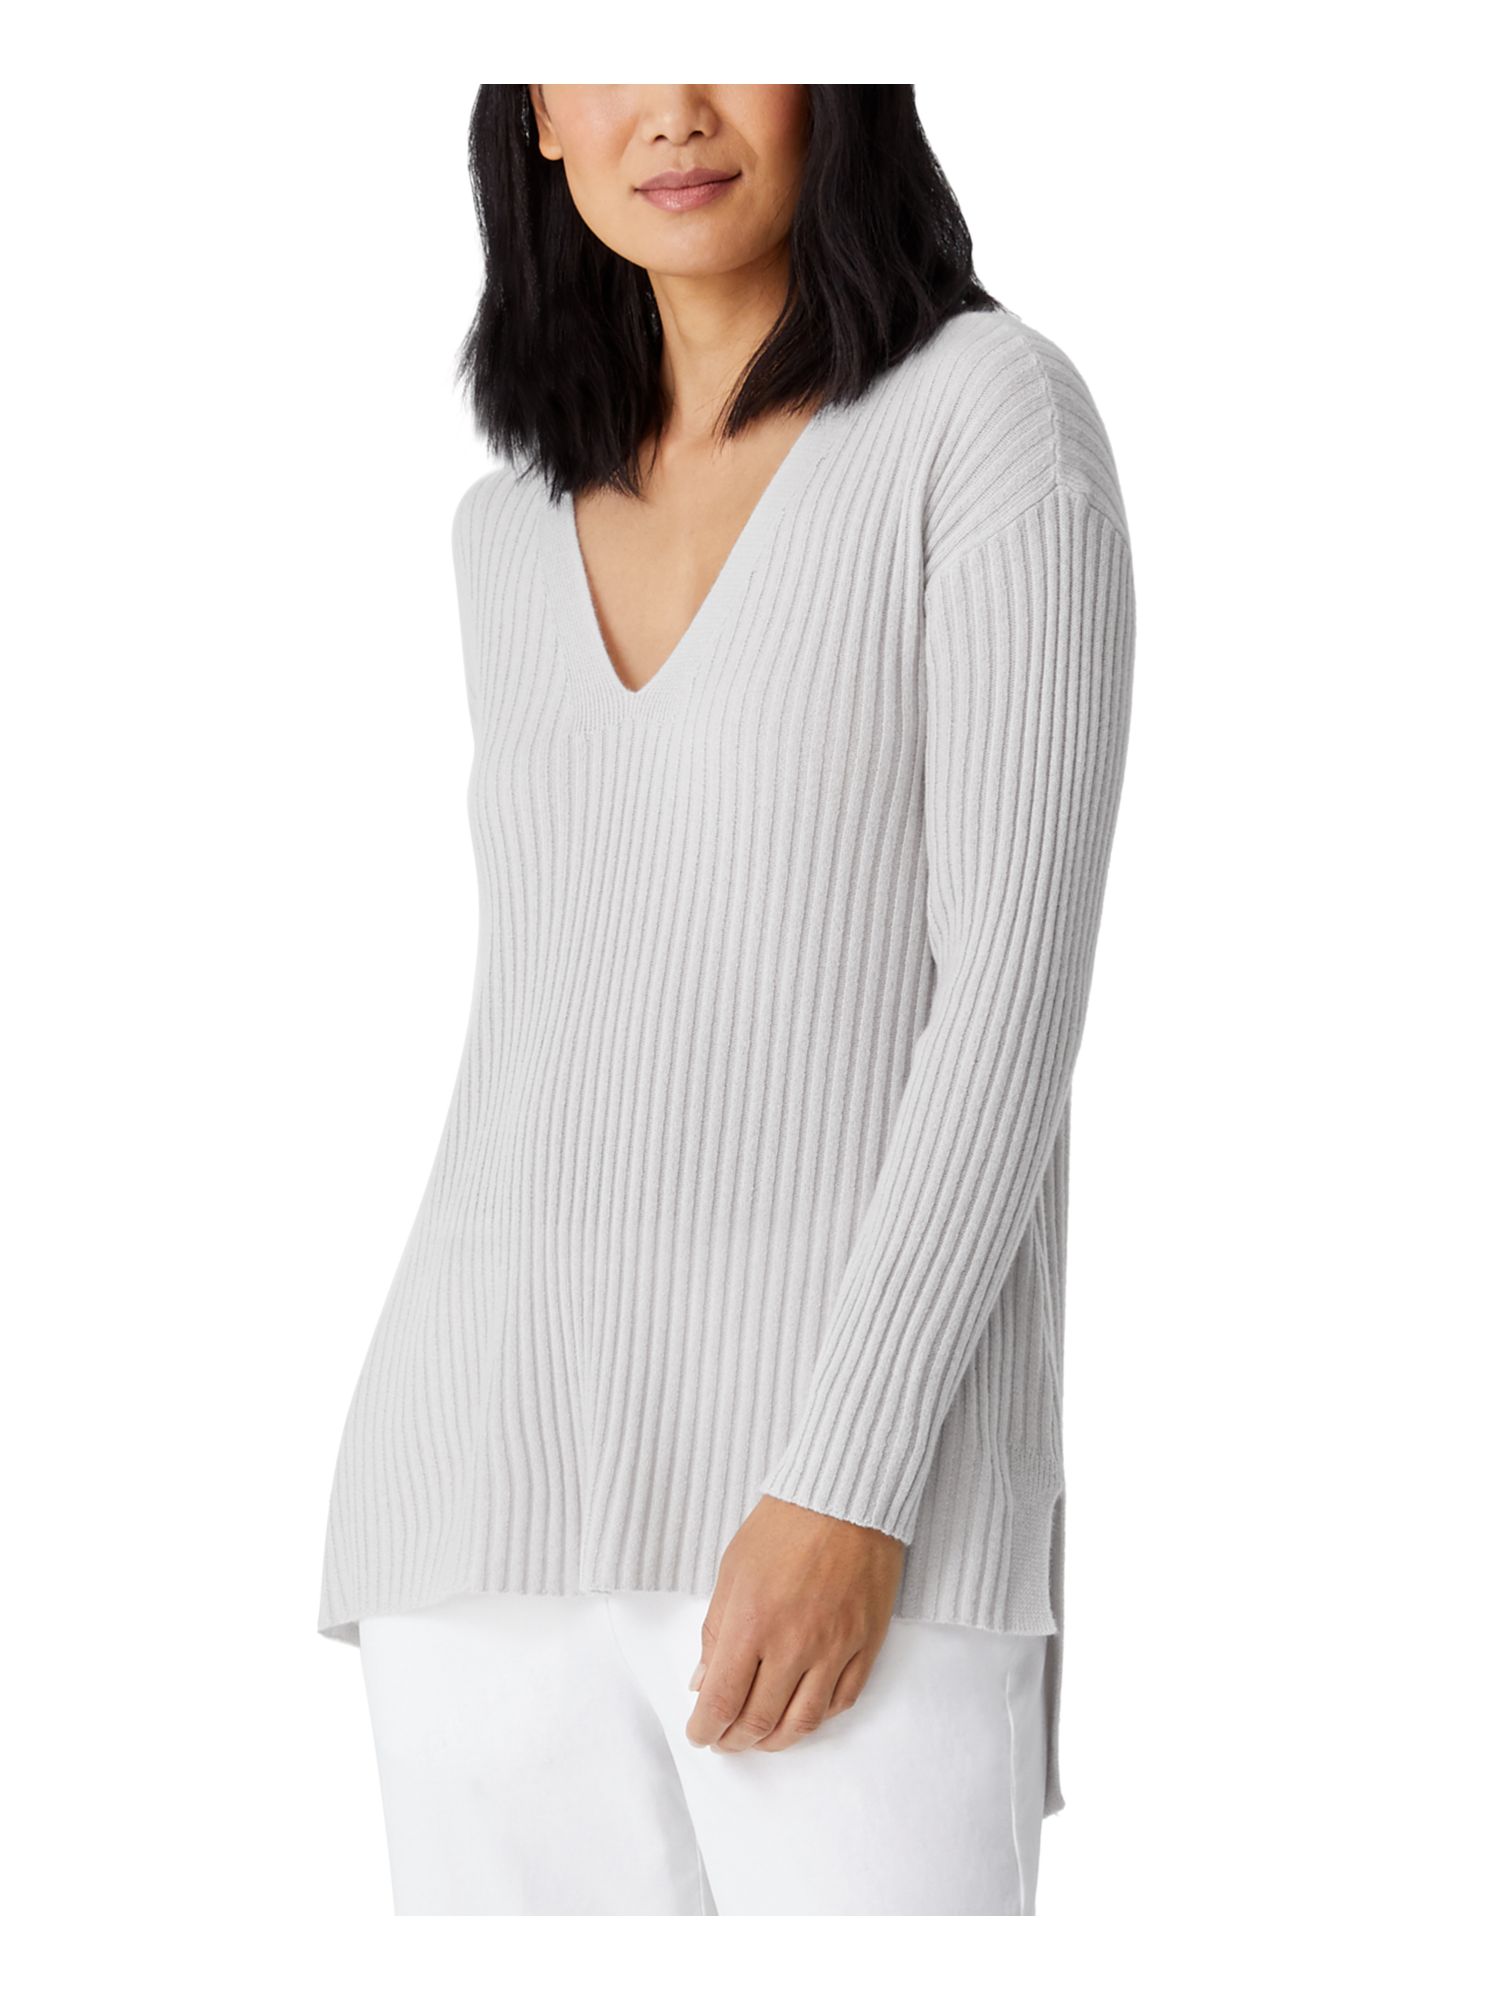 EILEEN FISHER Womens Gray Cashmere Ribbed Hi-lo Hem Long Sleeve V Neck Wear To Work Tunic Sweater S